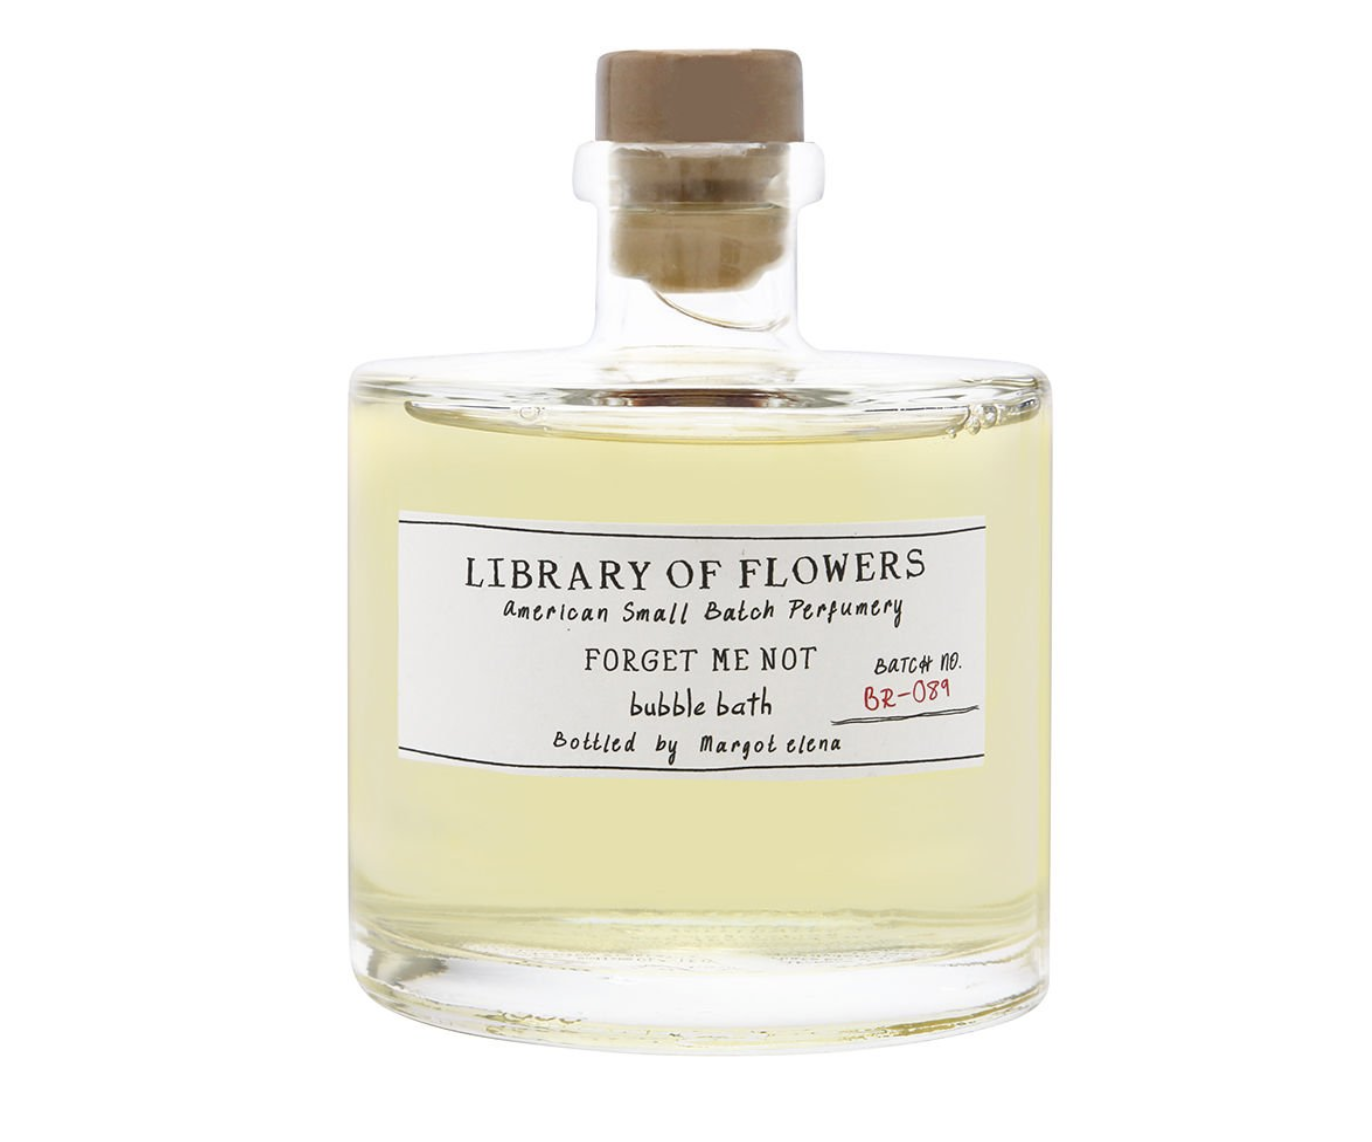 Library of Flowers Forget Me Not Bubble Bath